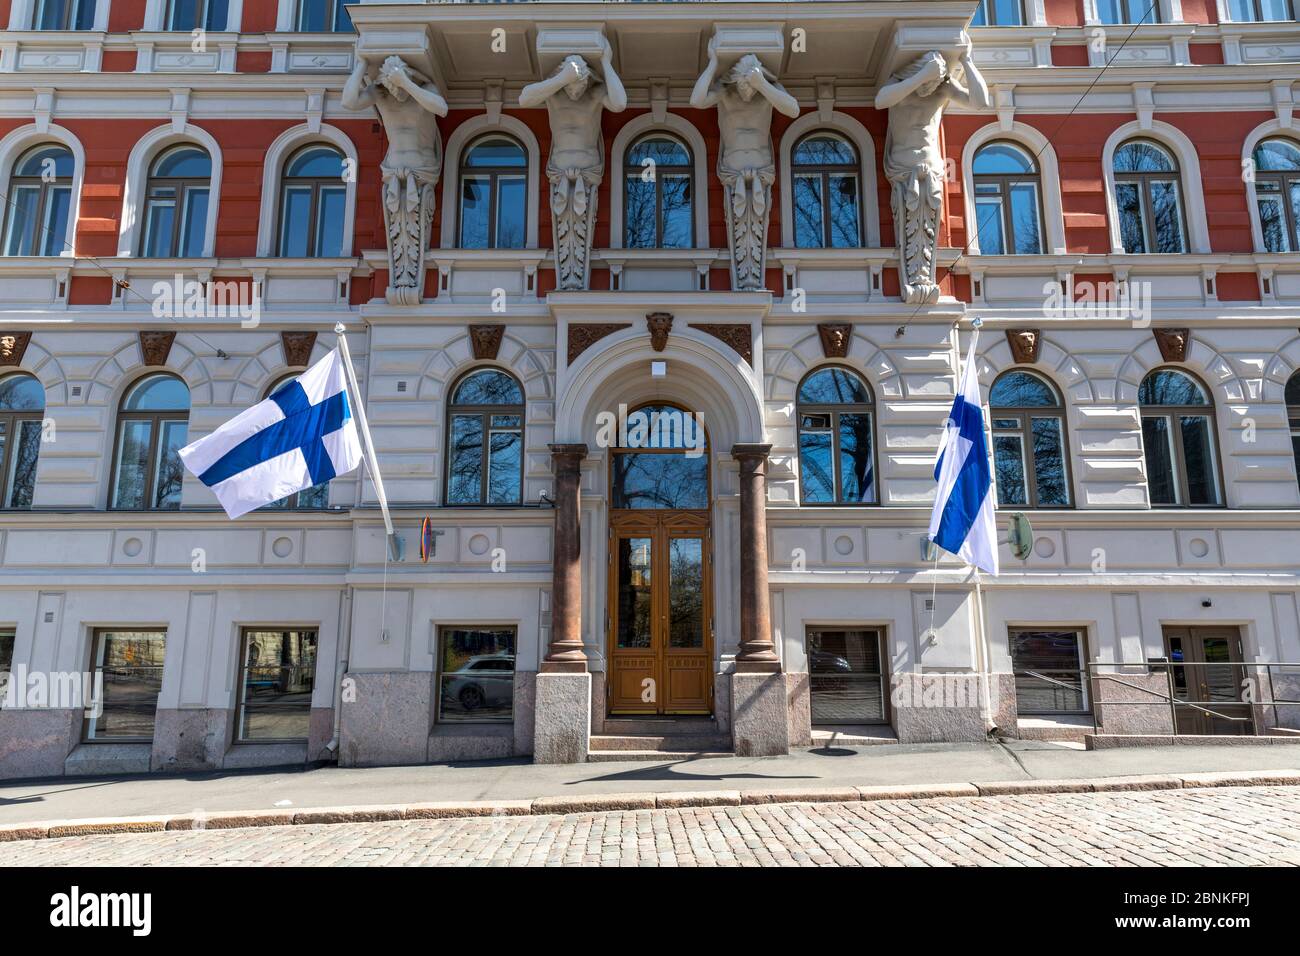 Historical building facade in Helsinki with Finnish flags flying Stock Photo